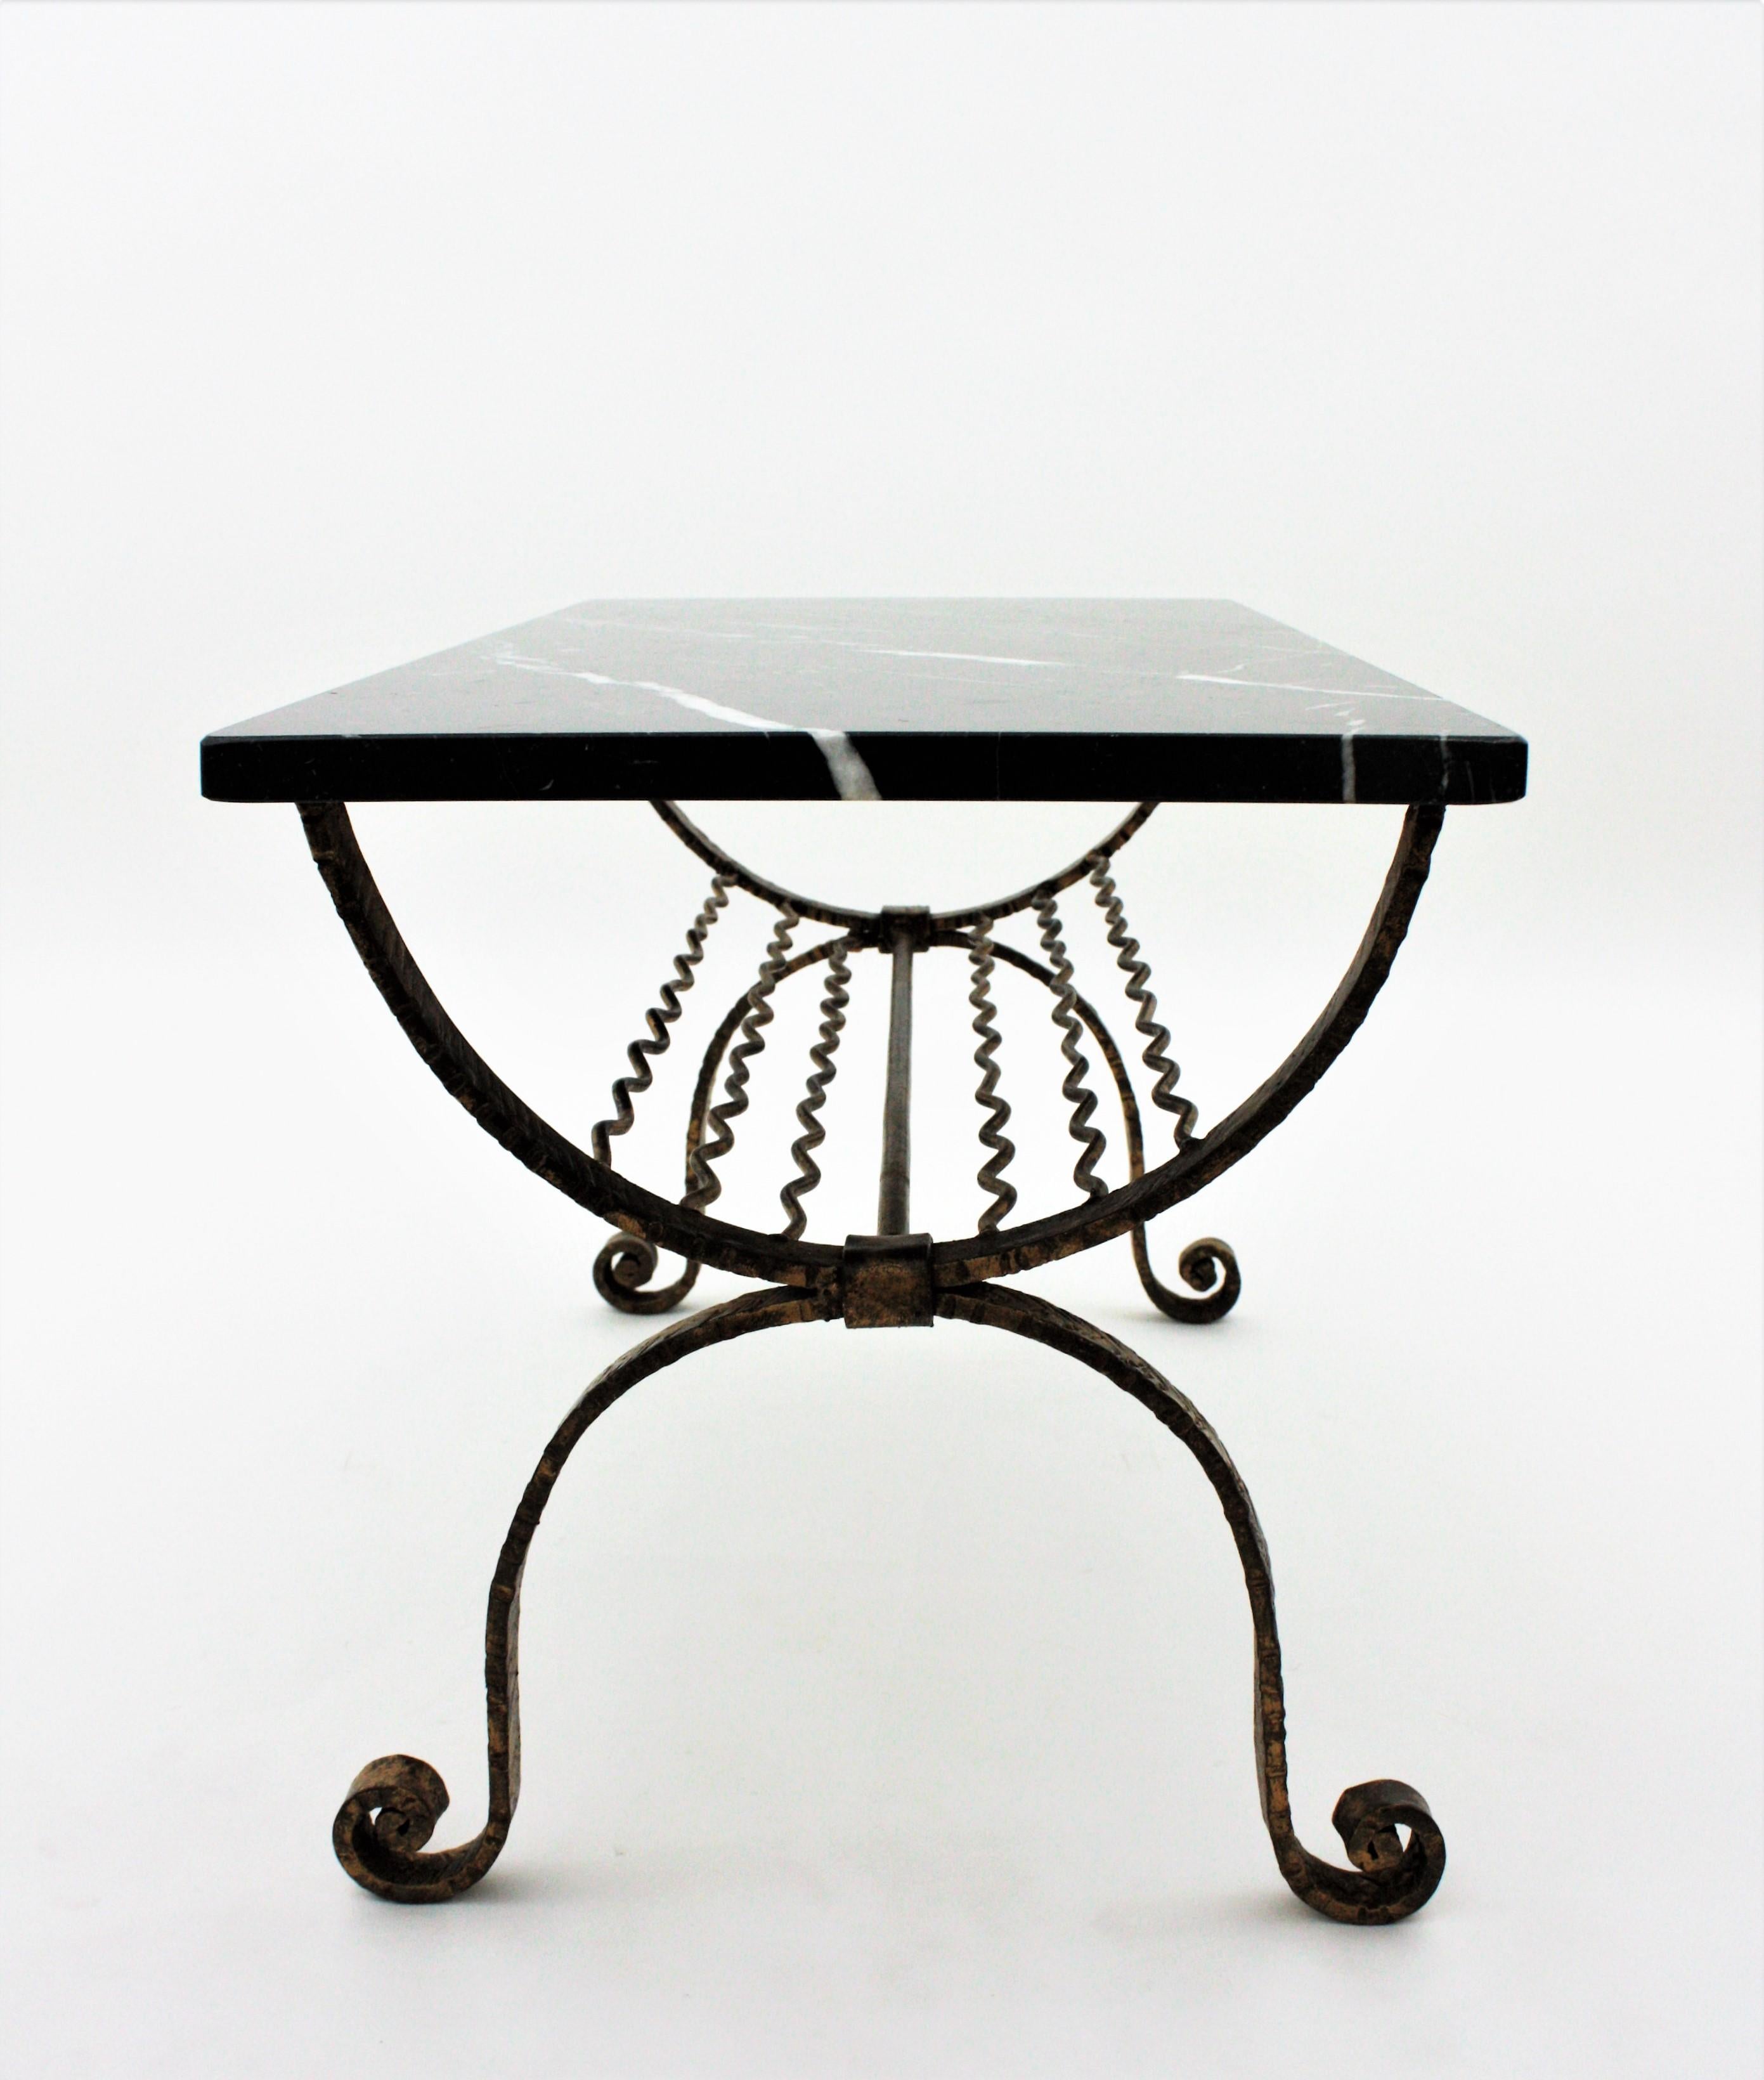 20th Century Poillerat Style French Gilt Iron and Marble Table with Magazine Stand, 1940s For Sale